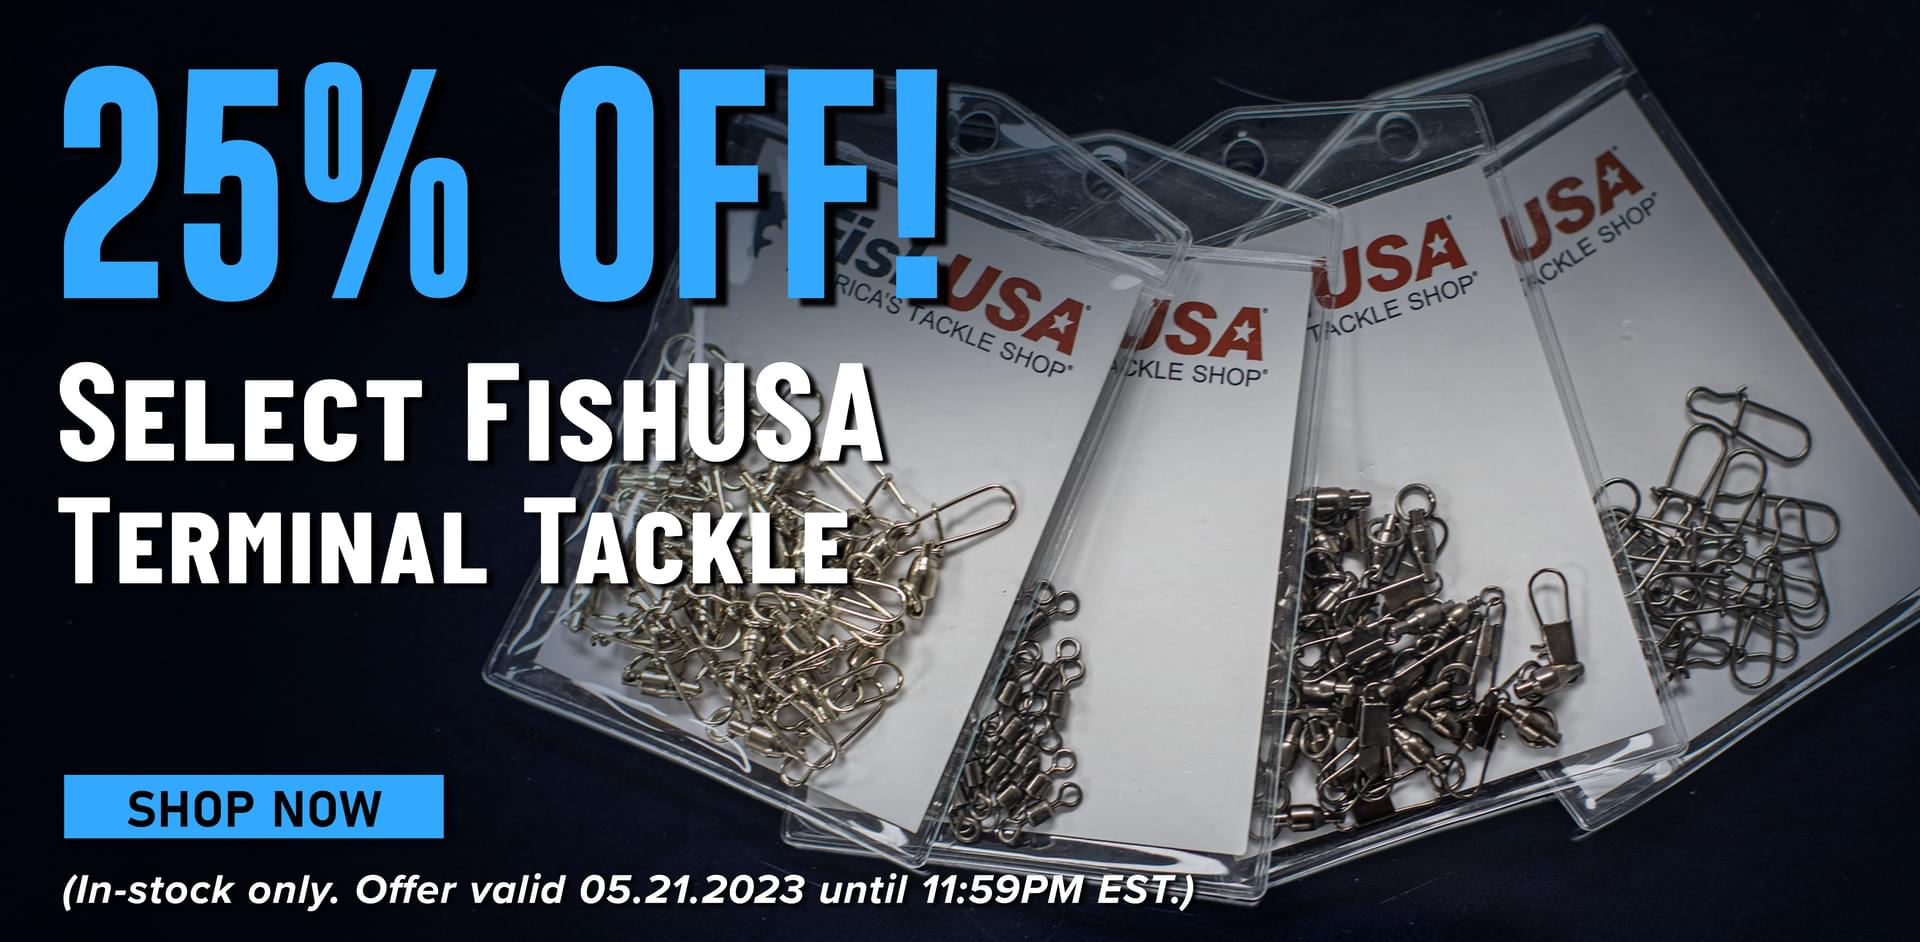 Early Memorial Day Deals! Gear Up for Your Long Weekend NOW! - Fish USA